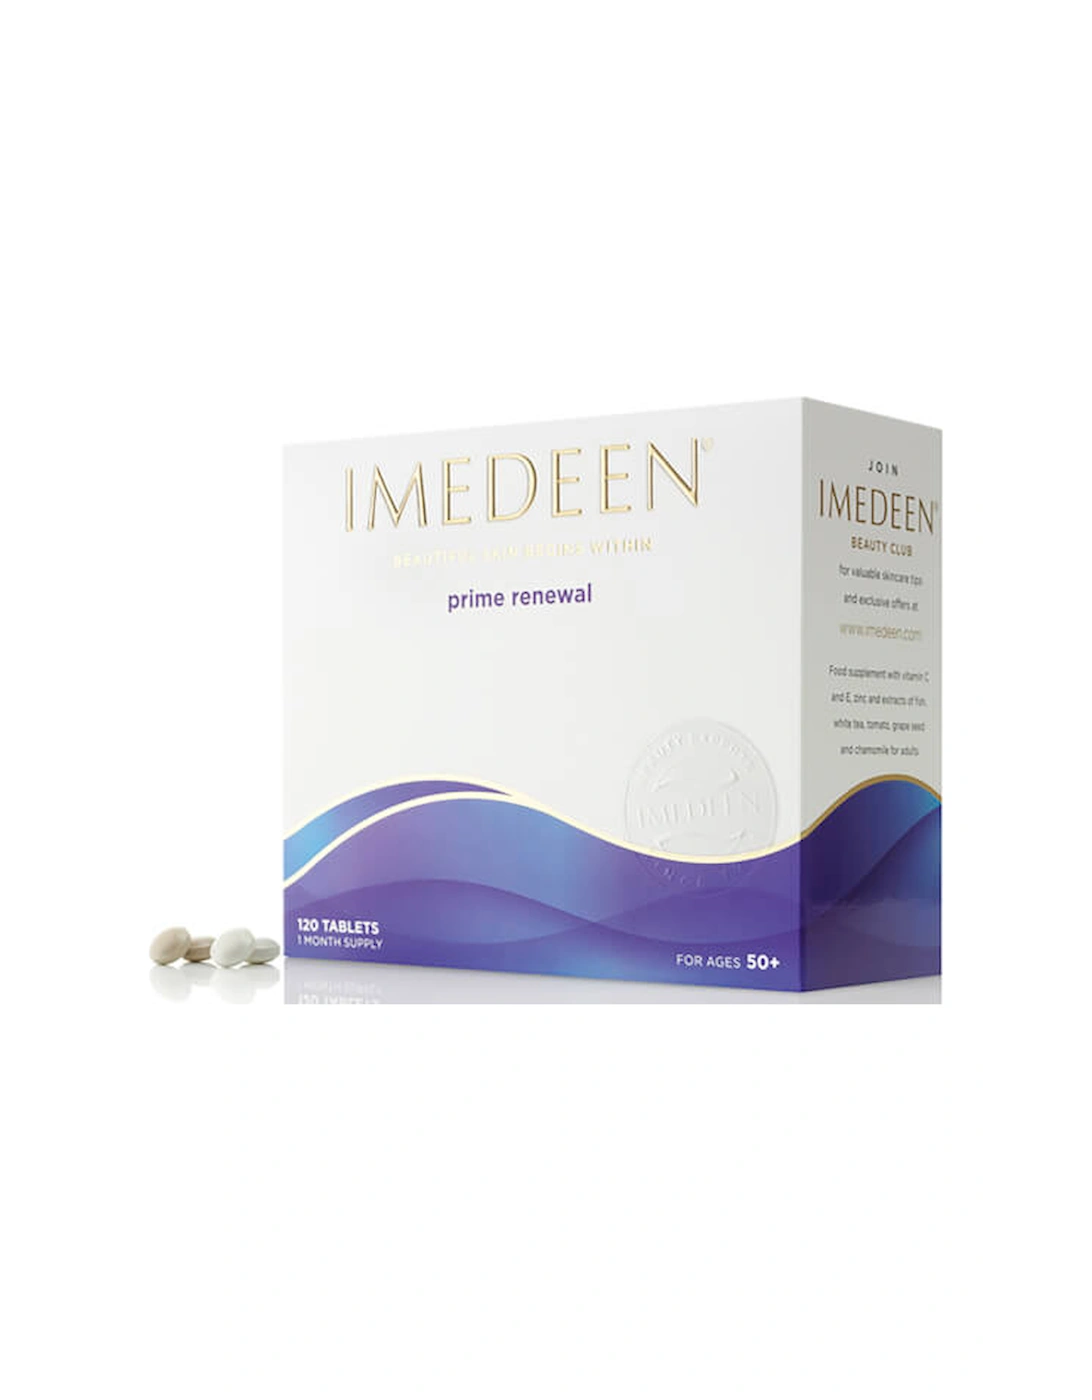 Prime Renewal Beauty & Skin Supplement, contains Vitamin C and Zinc, 120 Tablets, Age 50+ - Imedeen, 2 of 1